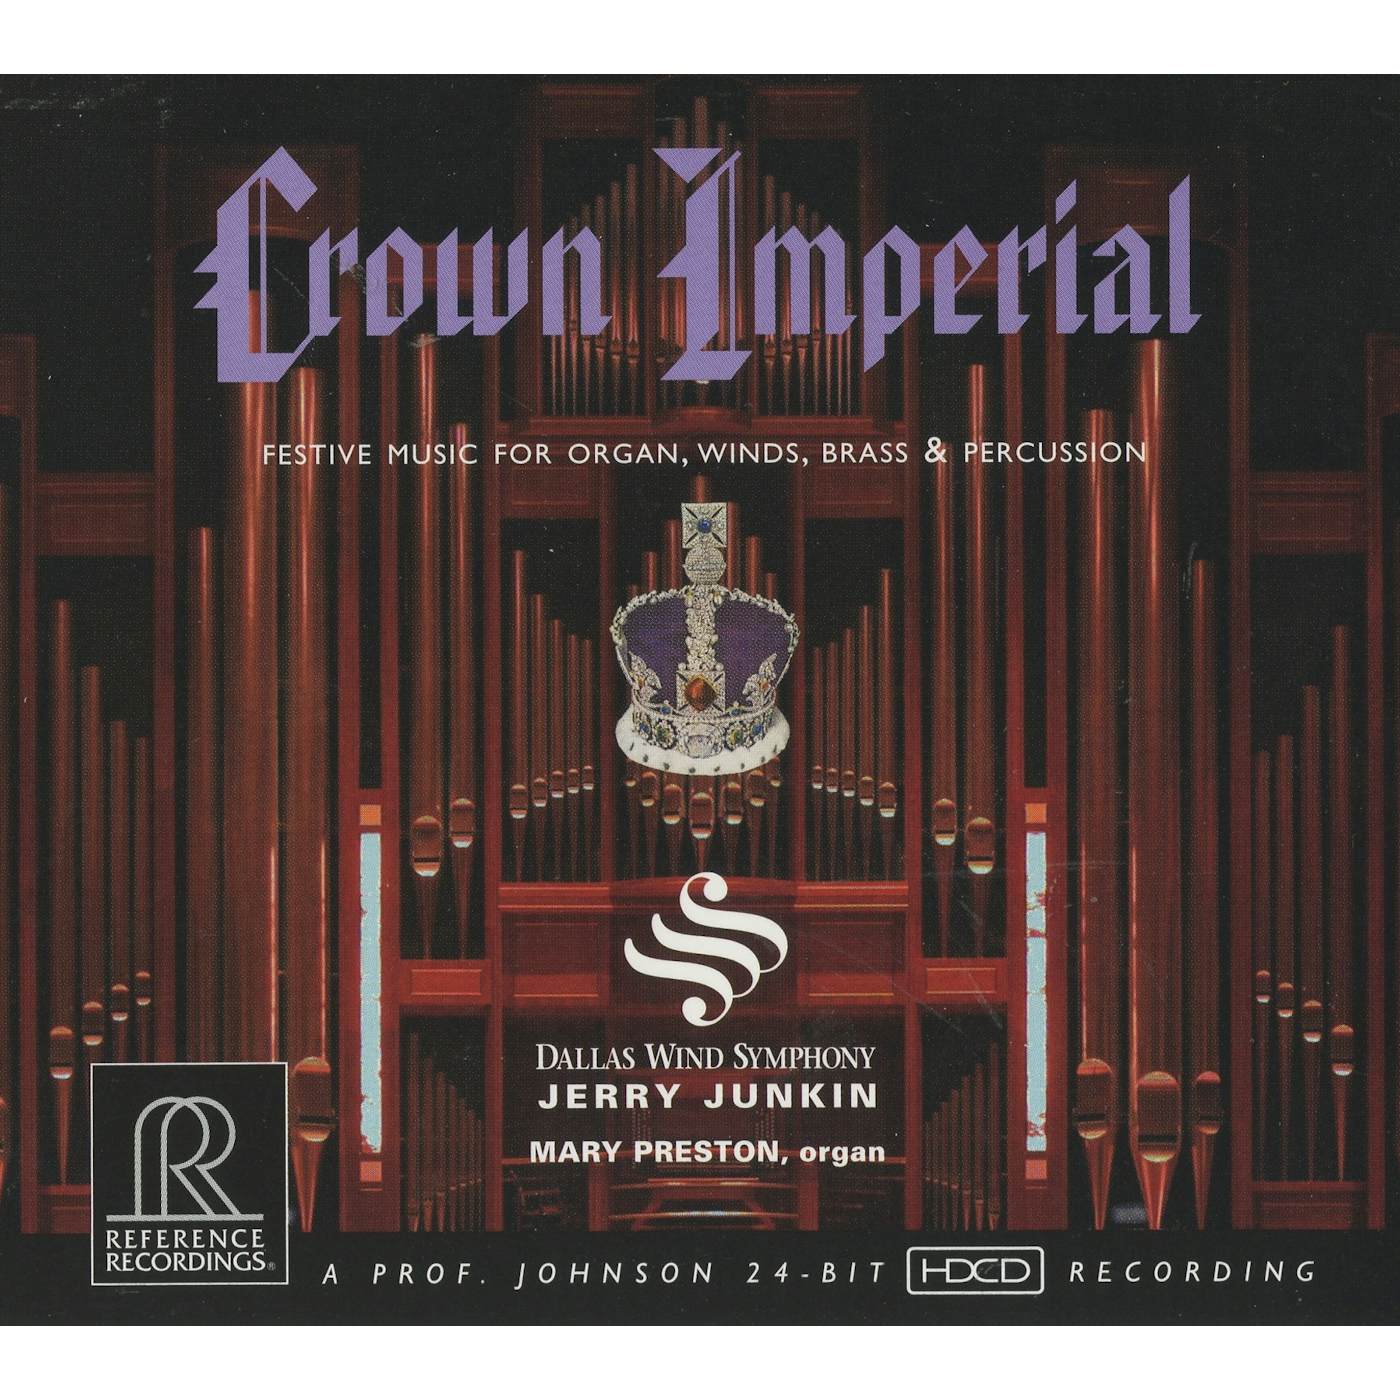 Dallas Wind Symphony CROWN IMPERIAL CD